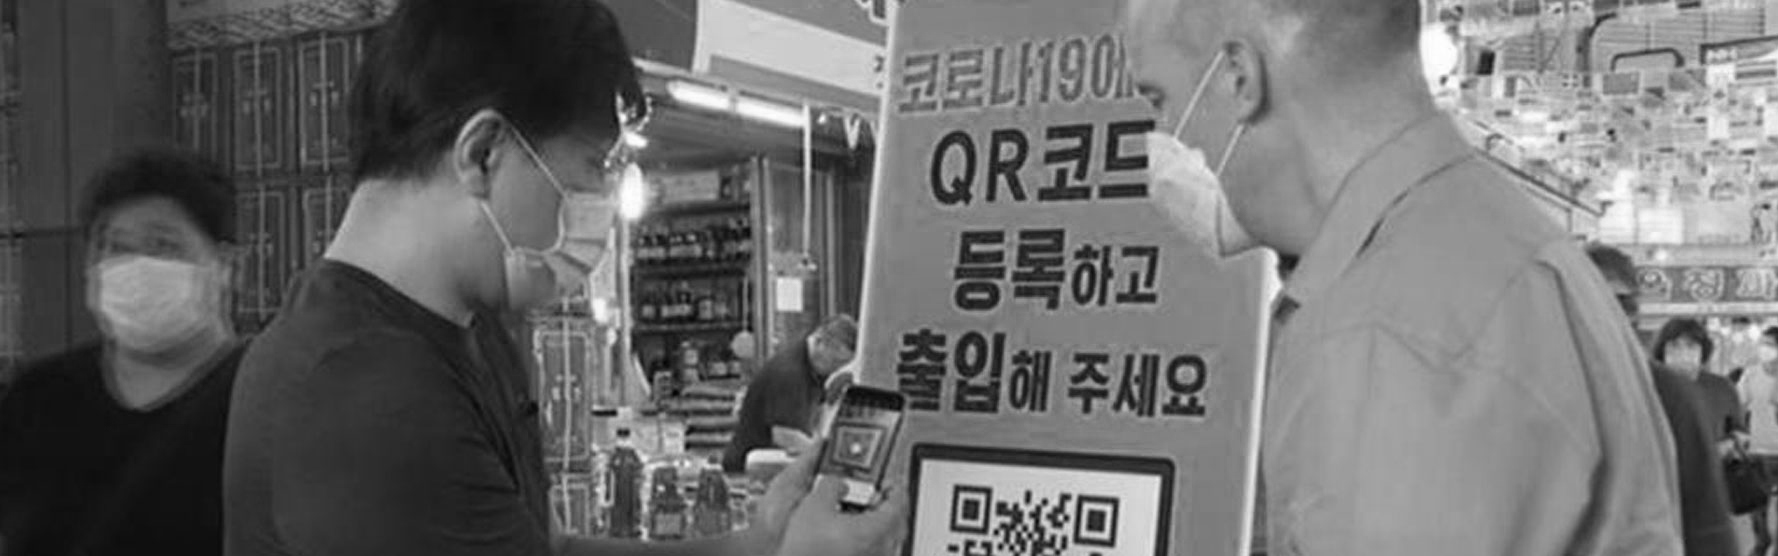 Editor's Choice: South Korea imposes QR log in system